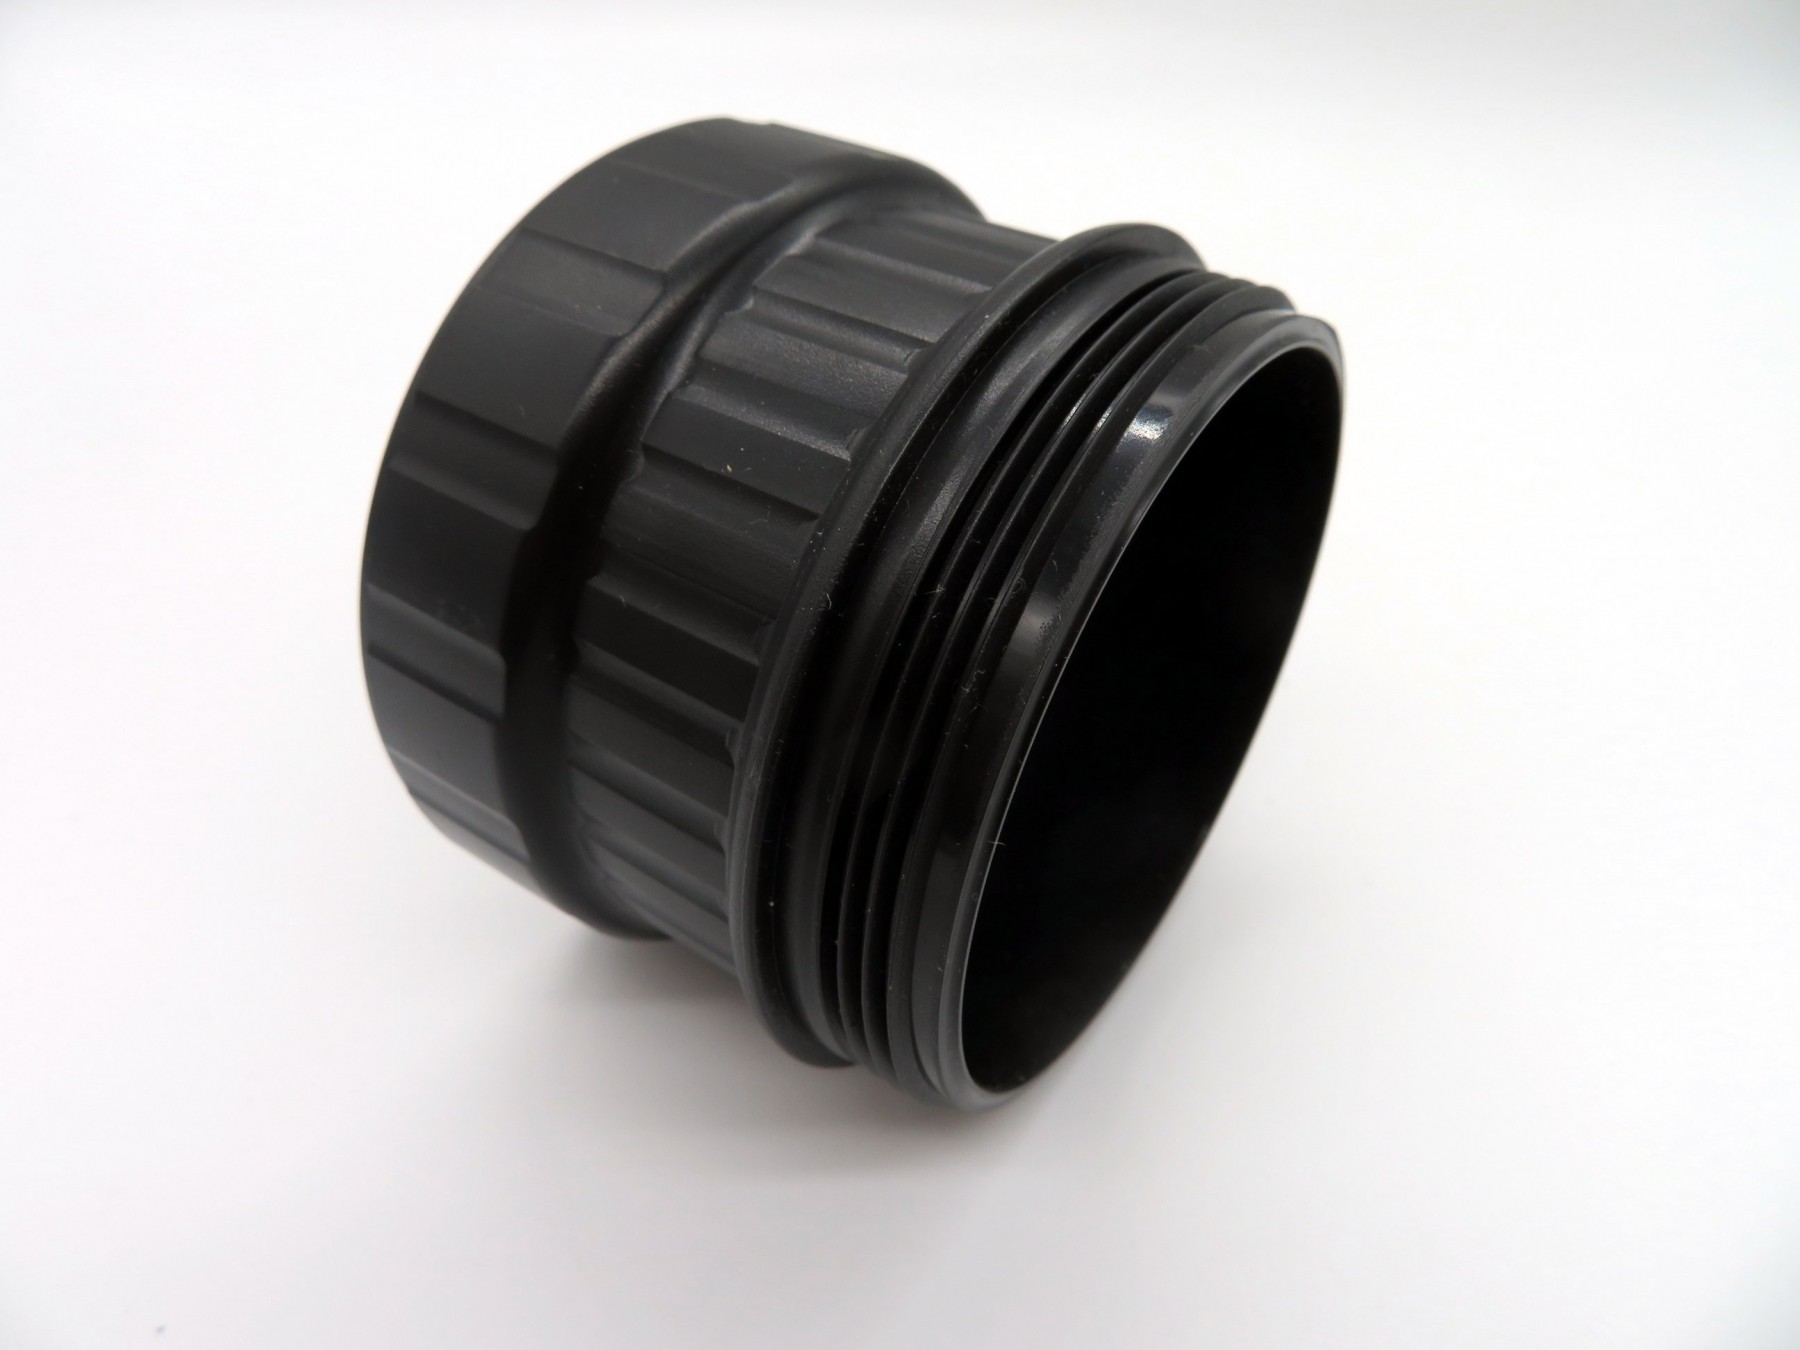 Genuine DiCAPac spare part spare-part-dicapac-wp-610-wp-h10-extension-for-lens-tube-32